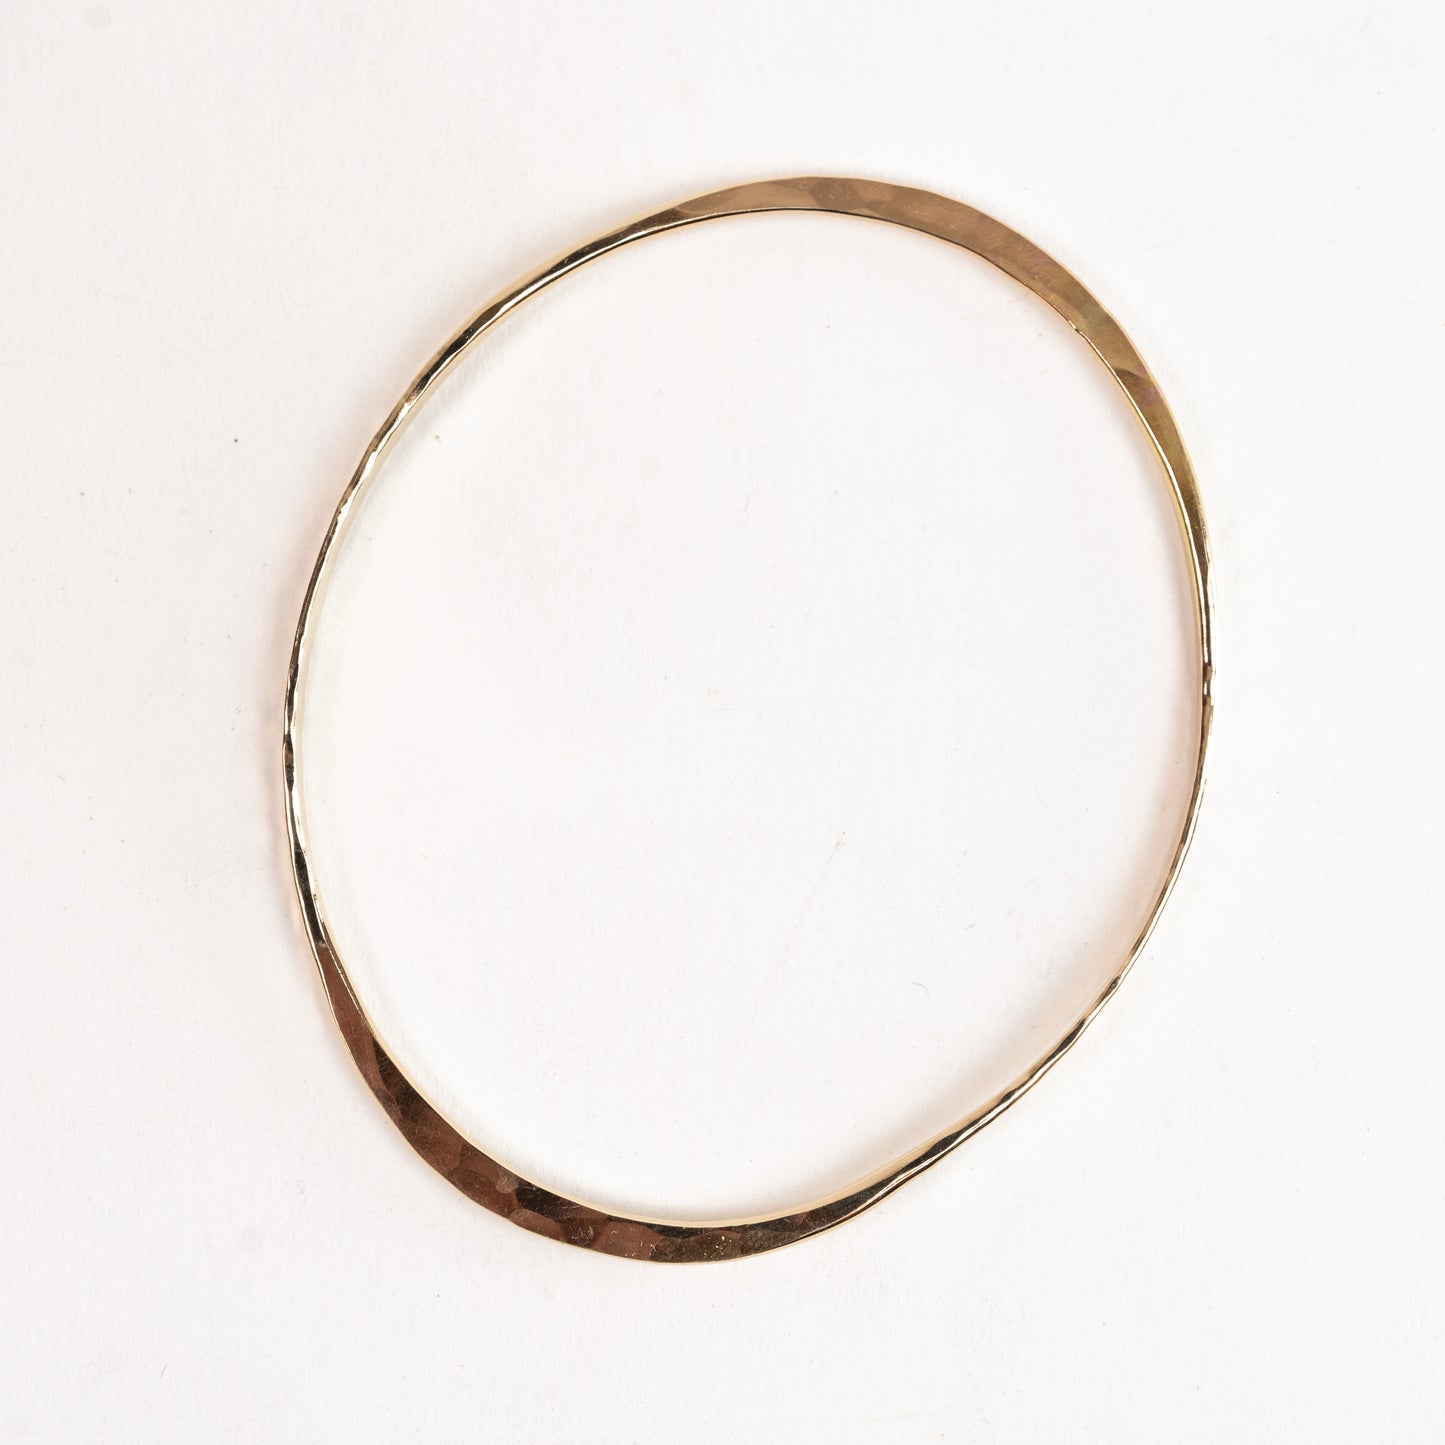 Bangle bracelet - 14k Solid Yellow Gold - hand forged into an oval - Light 12 gauge